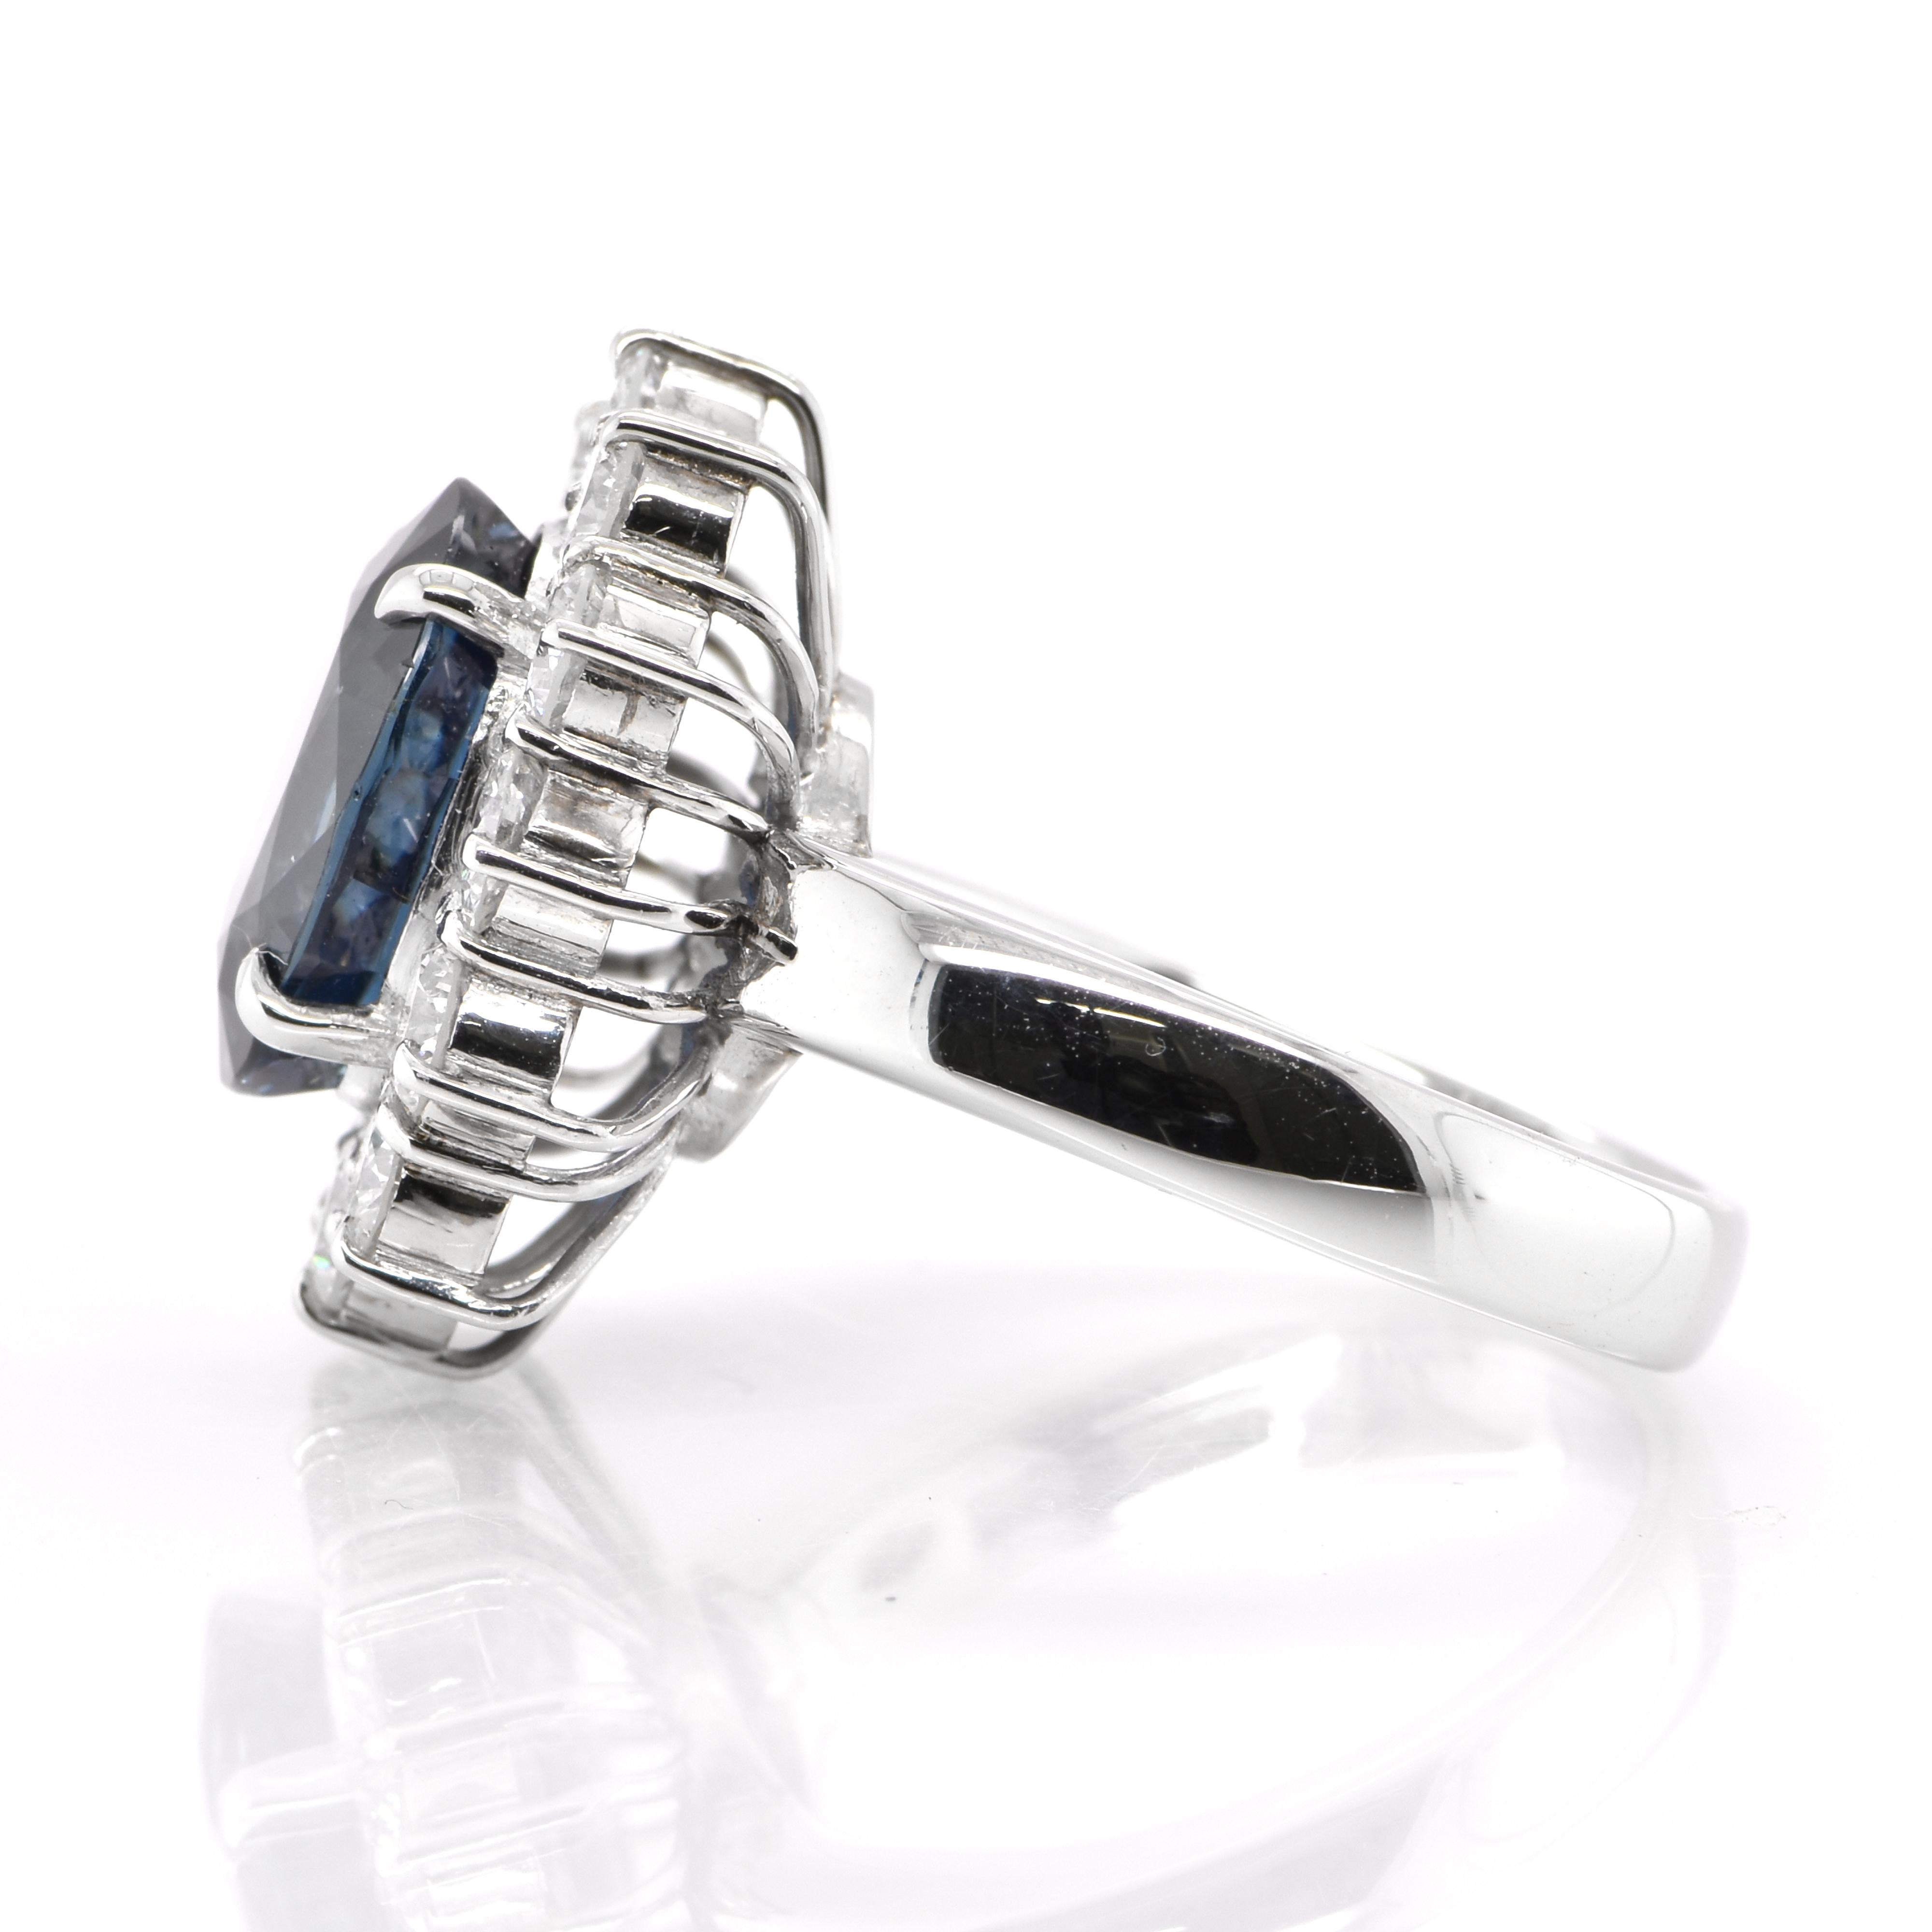 Oval Cut 5.96 Carat Natural Sapphire and Diamond Cocktail Ring Set in Platinum